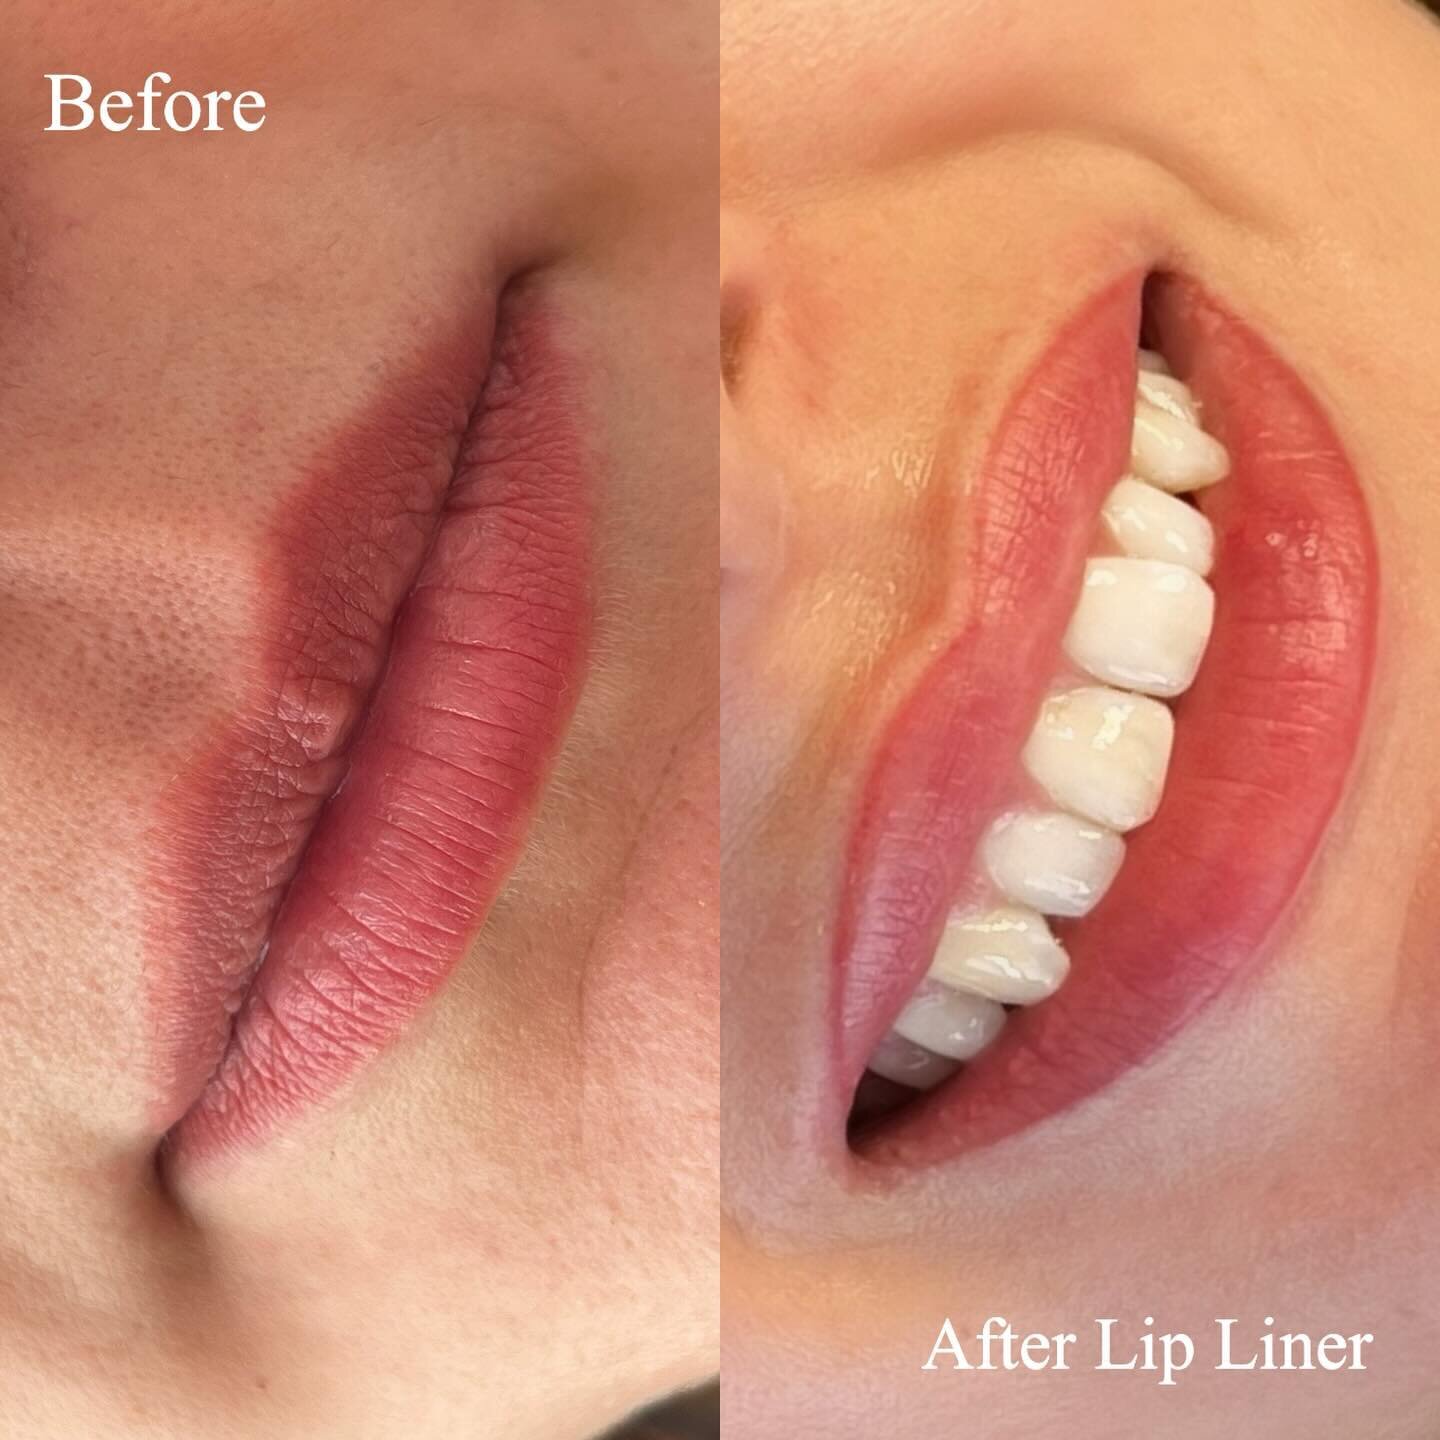 𝑳𝒊𝒑 𝑳𝒊𝒏𝒆𝒓 &amp; 𝑪𝒐𝒎𝒃𝒊𝒏𝒂𝒕𝒊𝒐𝒏 𝑩𝒓𝒐𝒘𝒔

My client was due a touch-up on her brows and decided to  have lip liner.

She typically uses Charlotte Tilbury&rsquo;s lip colour &ldquo;pillow talk&rdquo;, but we both agreed that adding a 